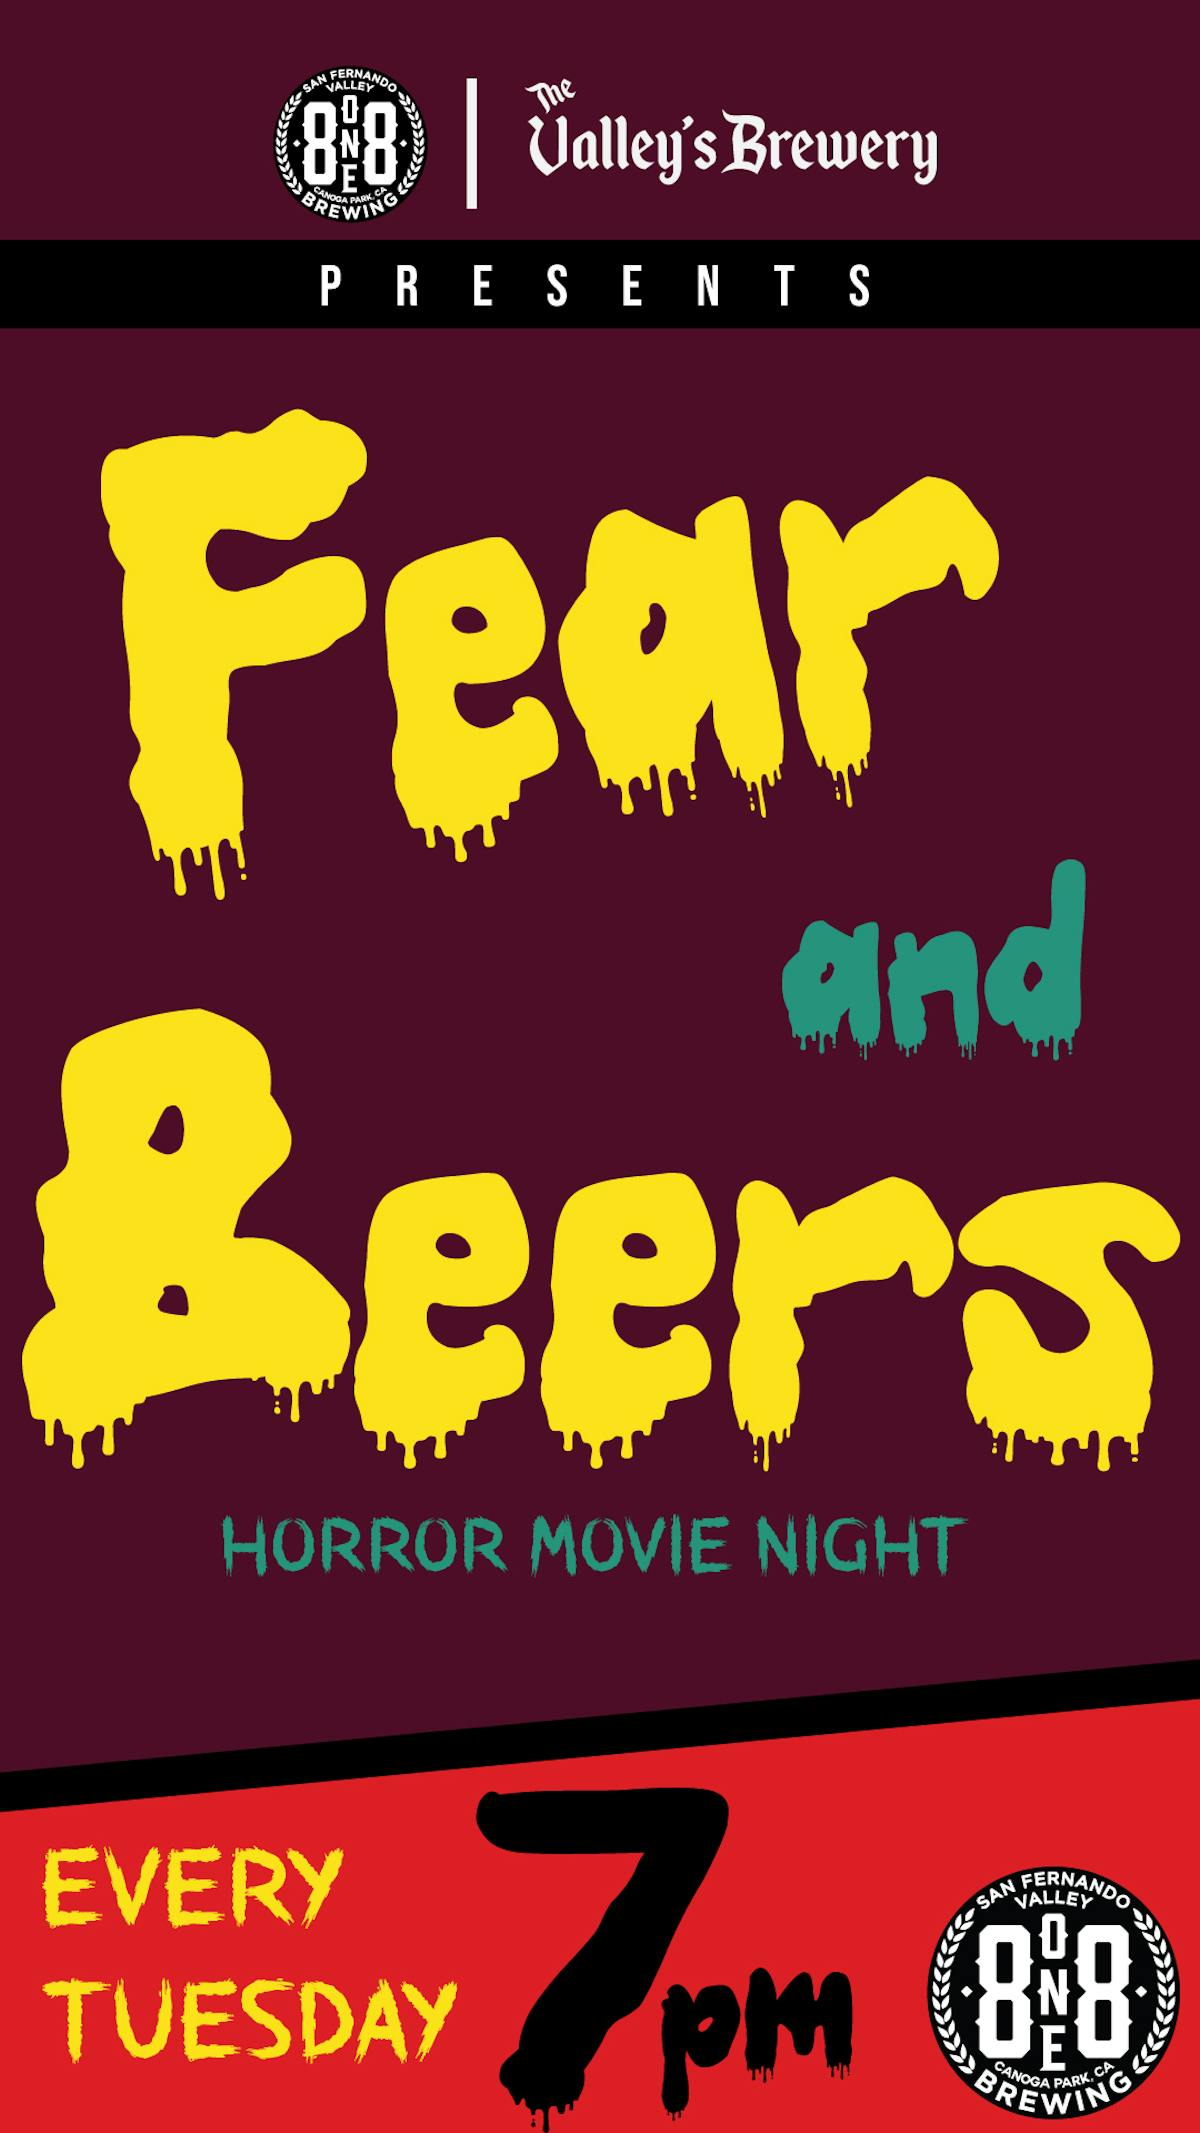 fear and beers at the valleys brewery flyer.  What to do on Tuesday's in the Valley